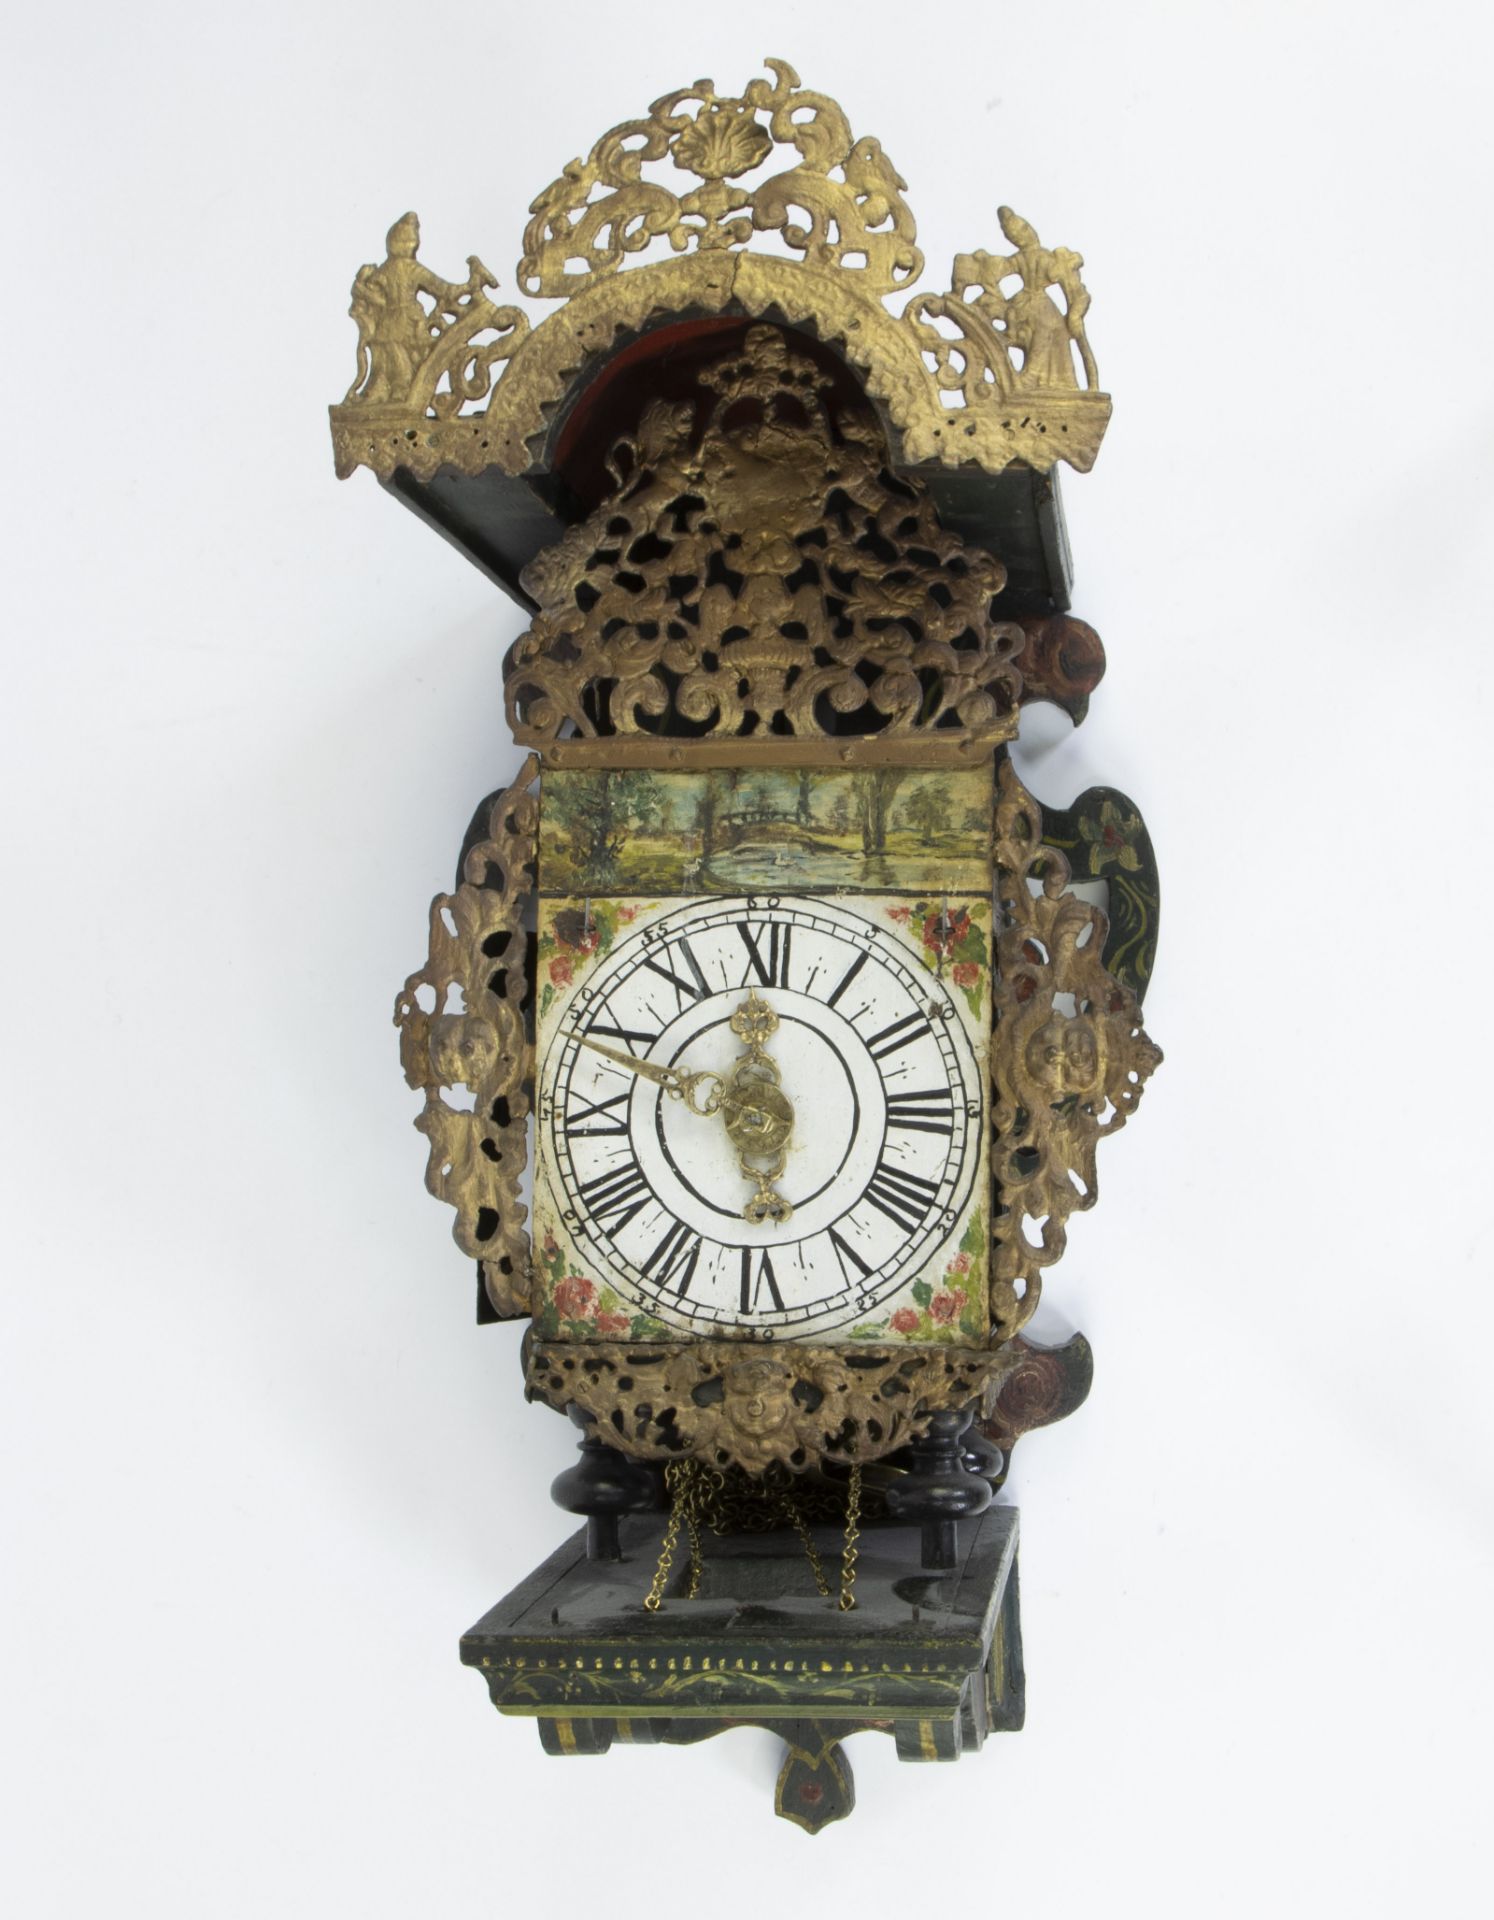 Friesian stool clock with polychrome painted case finished with rocailles, lions, garlands and figur